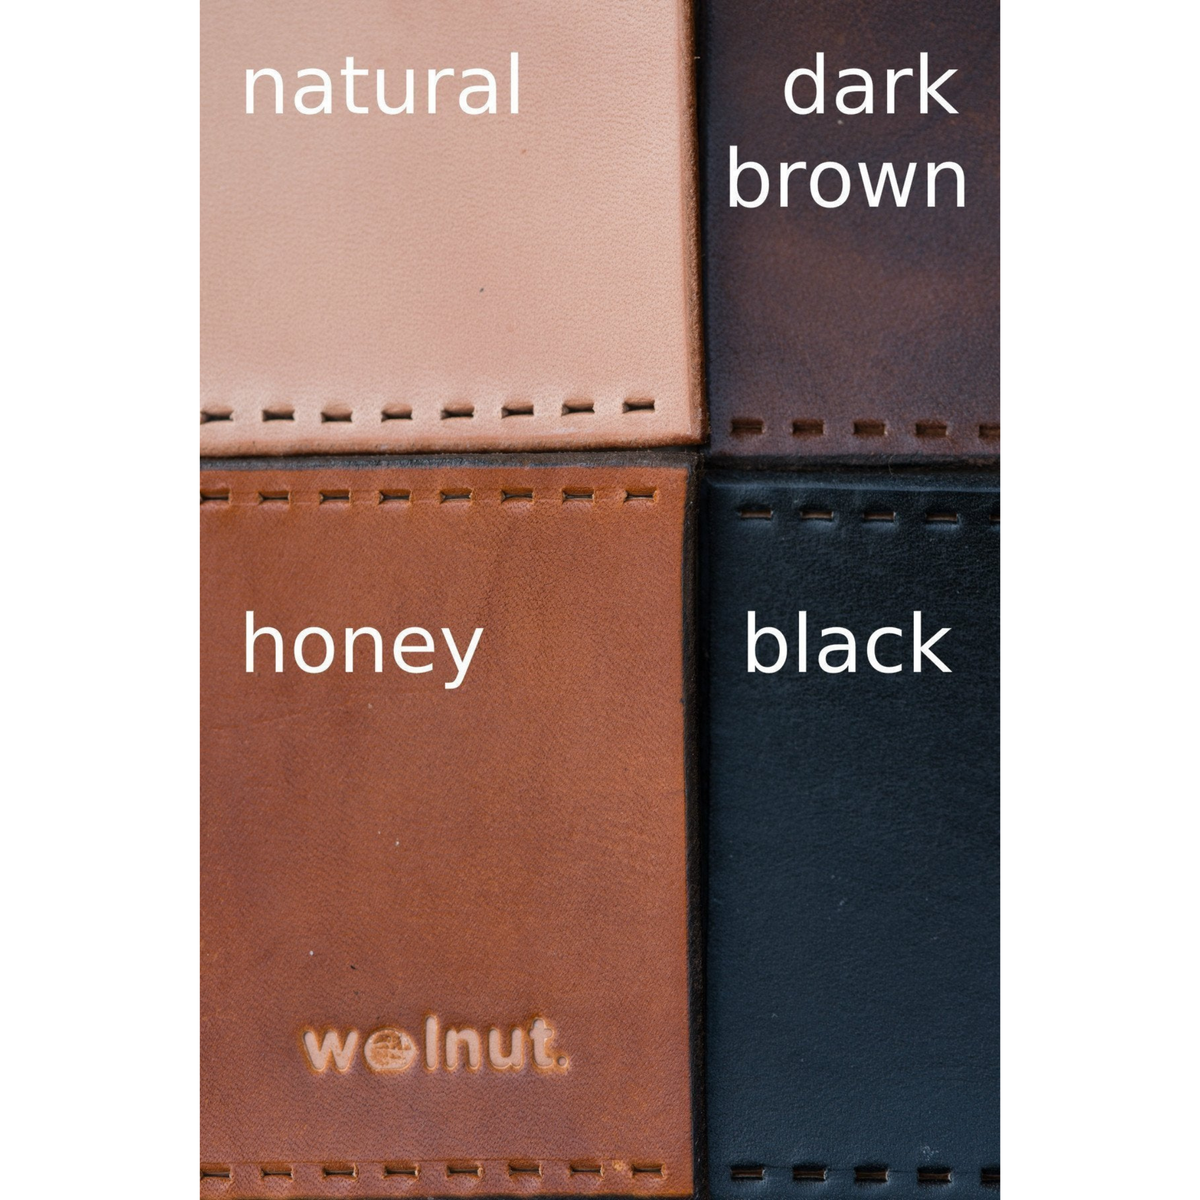 Color swatch in natural light showing all four leather colors next to each other: Natural (undyed), Honey, Dark Brown, and Black